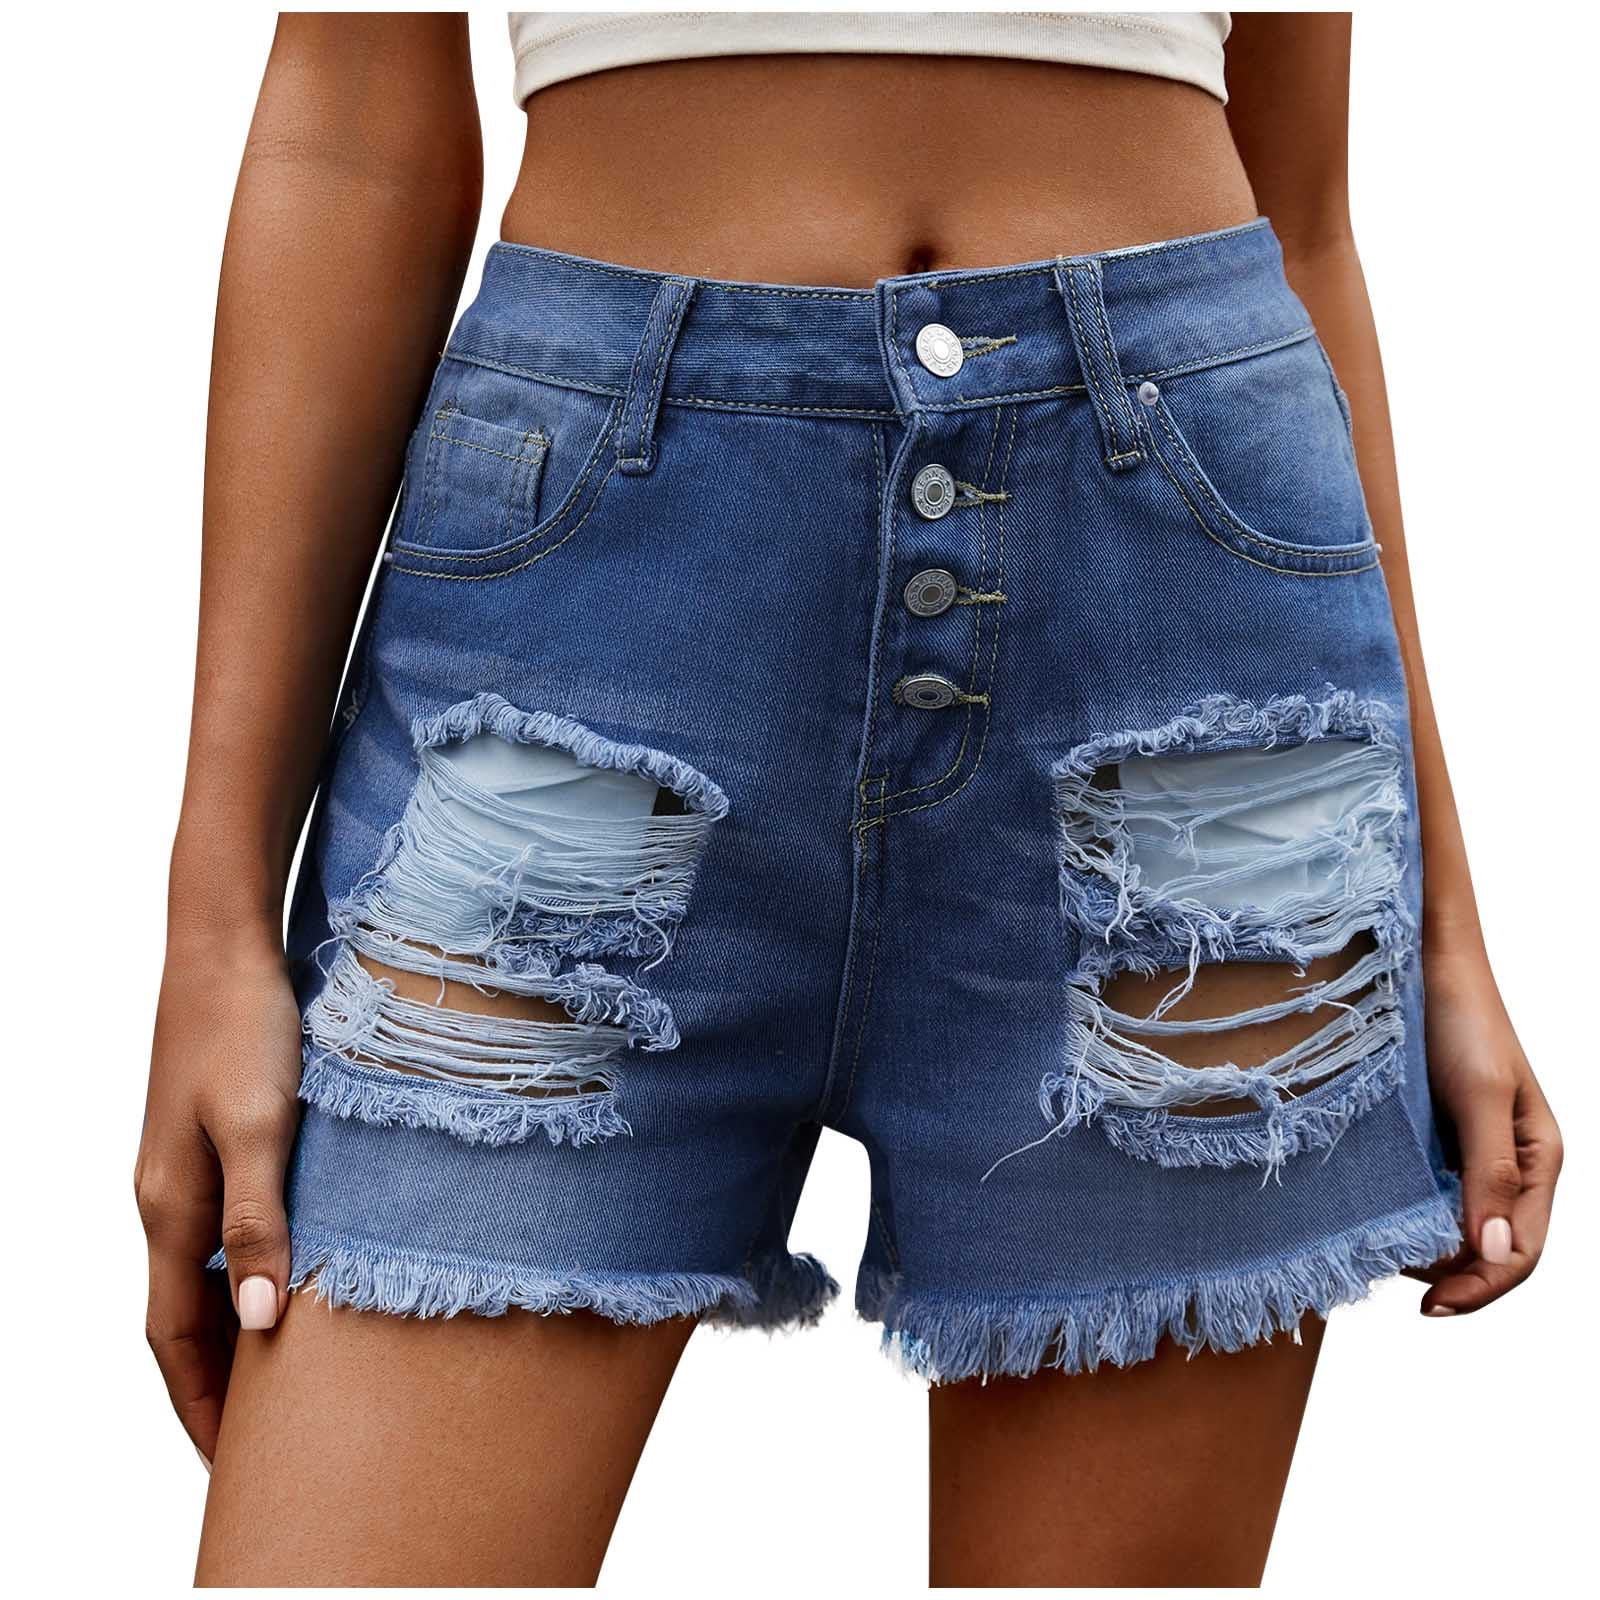 JWZUY Womens Jean Shorts High Waisted Button Up Ripped Distressed Cut Off  Frayed Denim Jean Shorts Fashion Summer Shorts Blue L